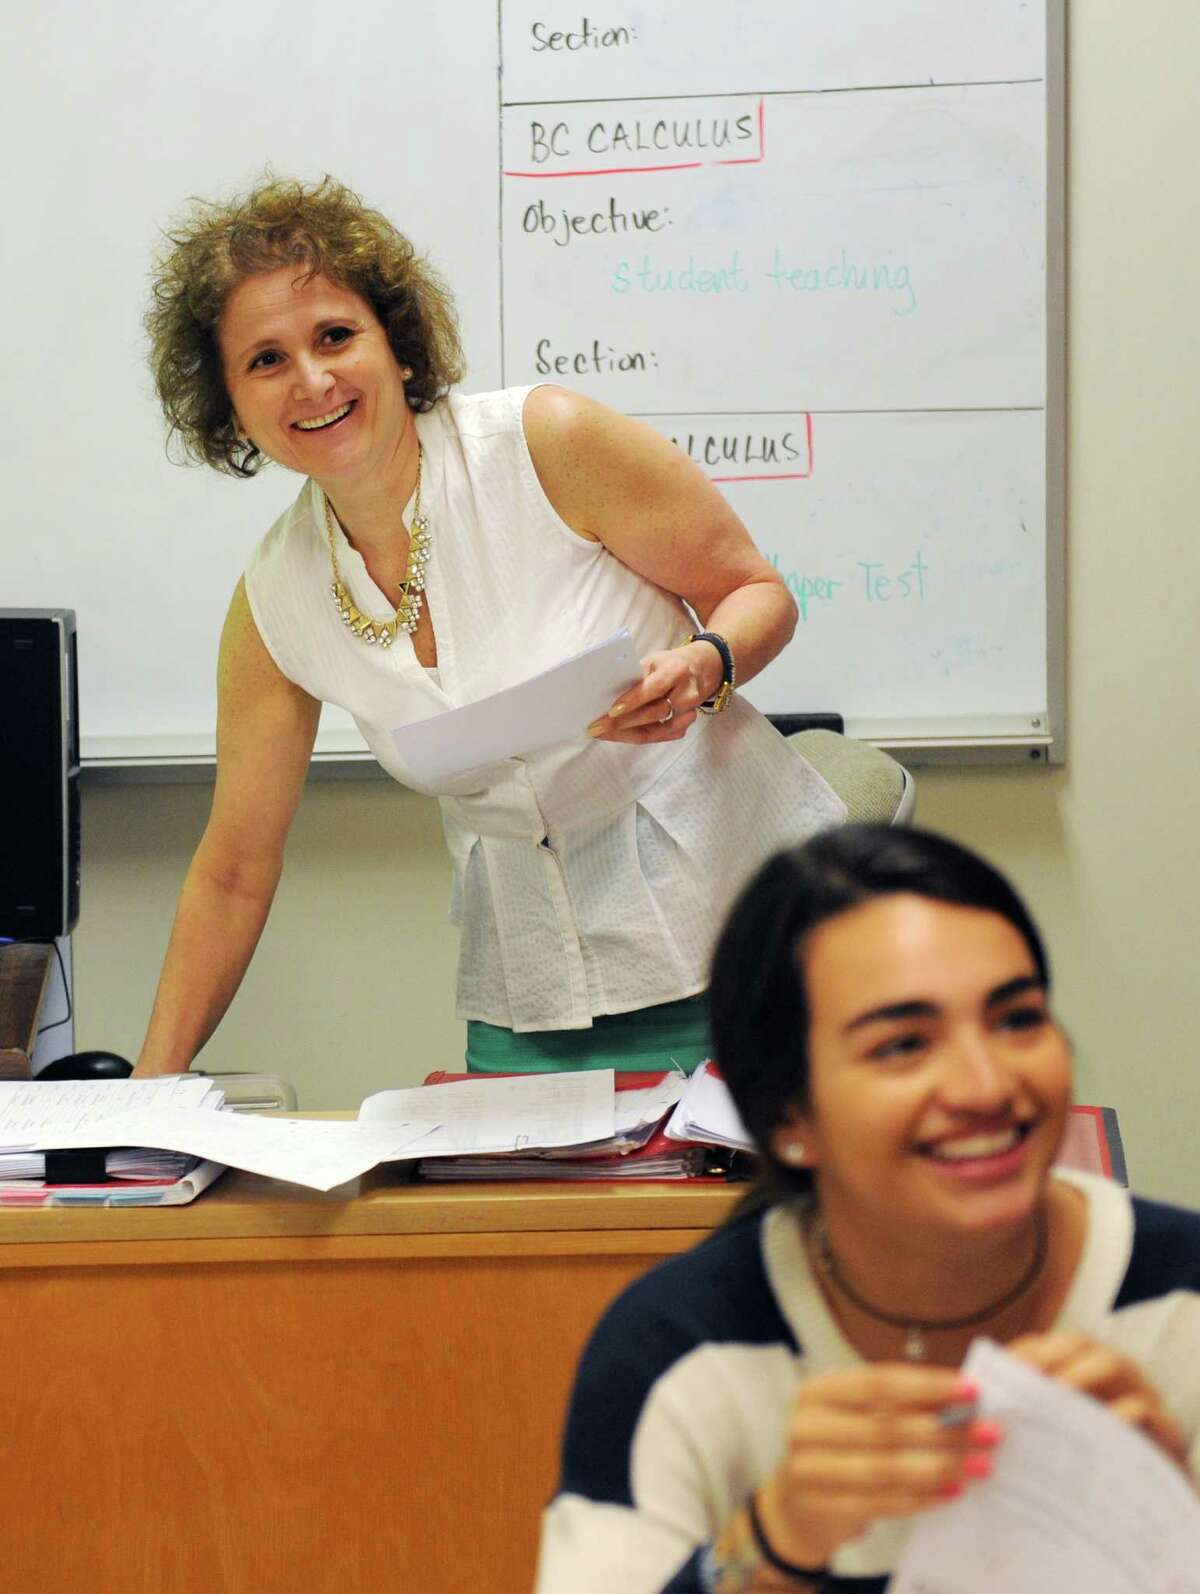 Calculus teacher Maryann Franchella laughs during her mixed-grade pre-calculus class at Greenwich High School in Greenwich, Conn. Thursday, June 4, 2015. Franchella was awarded one of the six Greenwich School District Distinguished Teacher Awards for 2015.